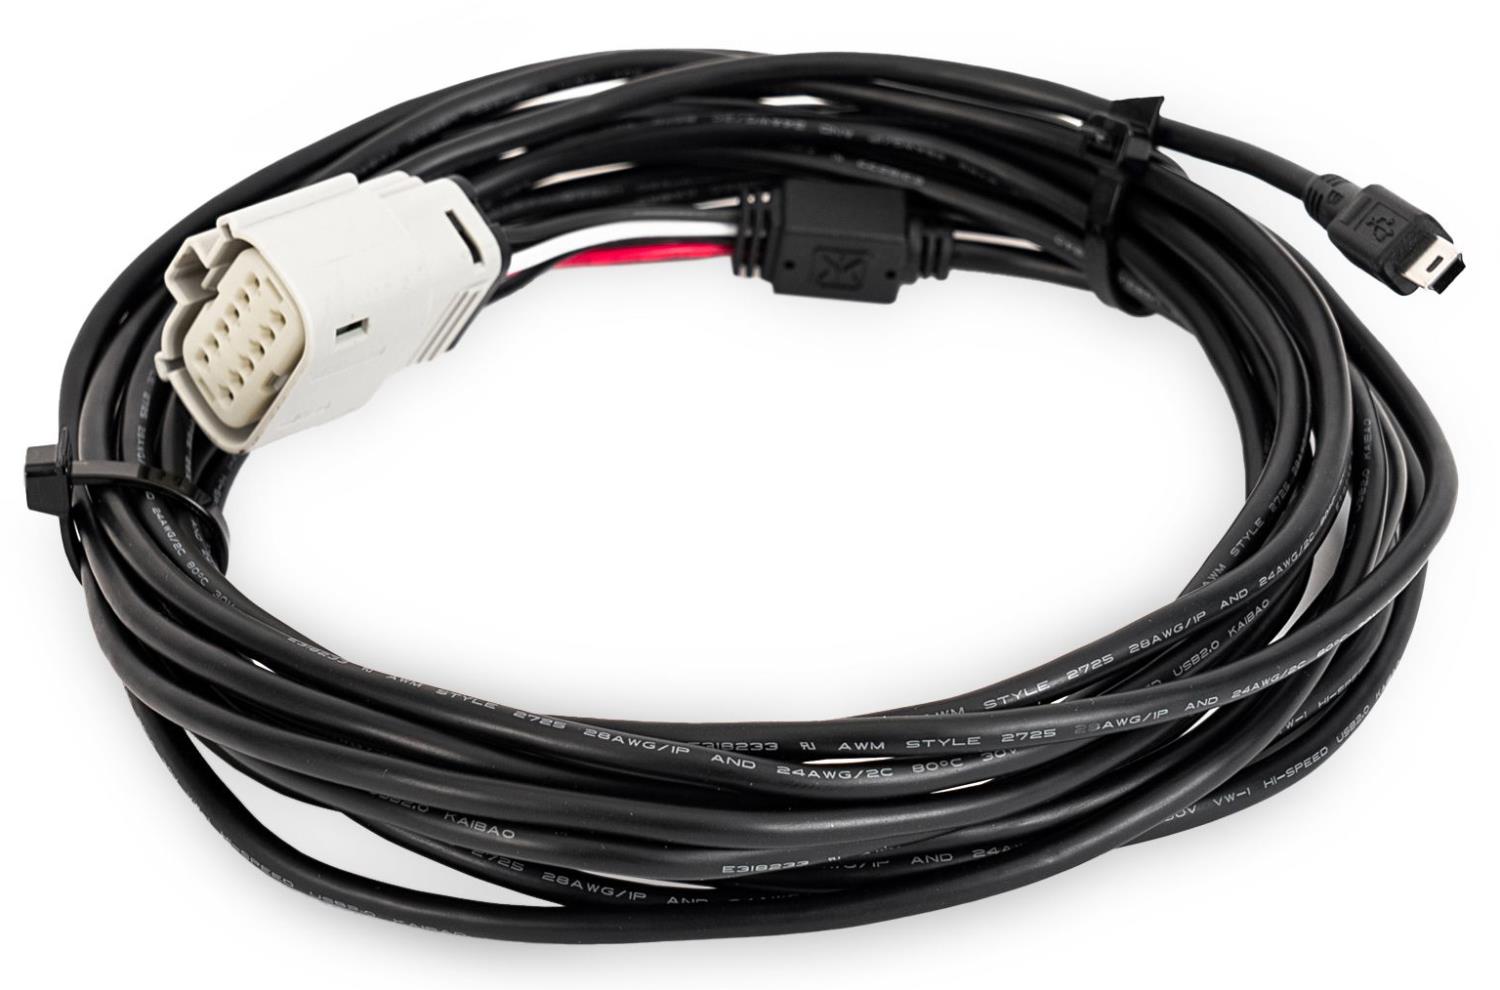 USB Wiring Harness for TouchPad+, 20 ft. Length, Plug-and-Play